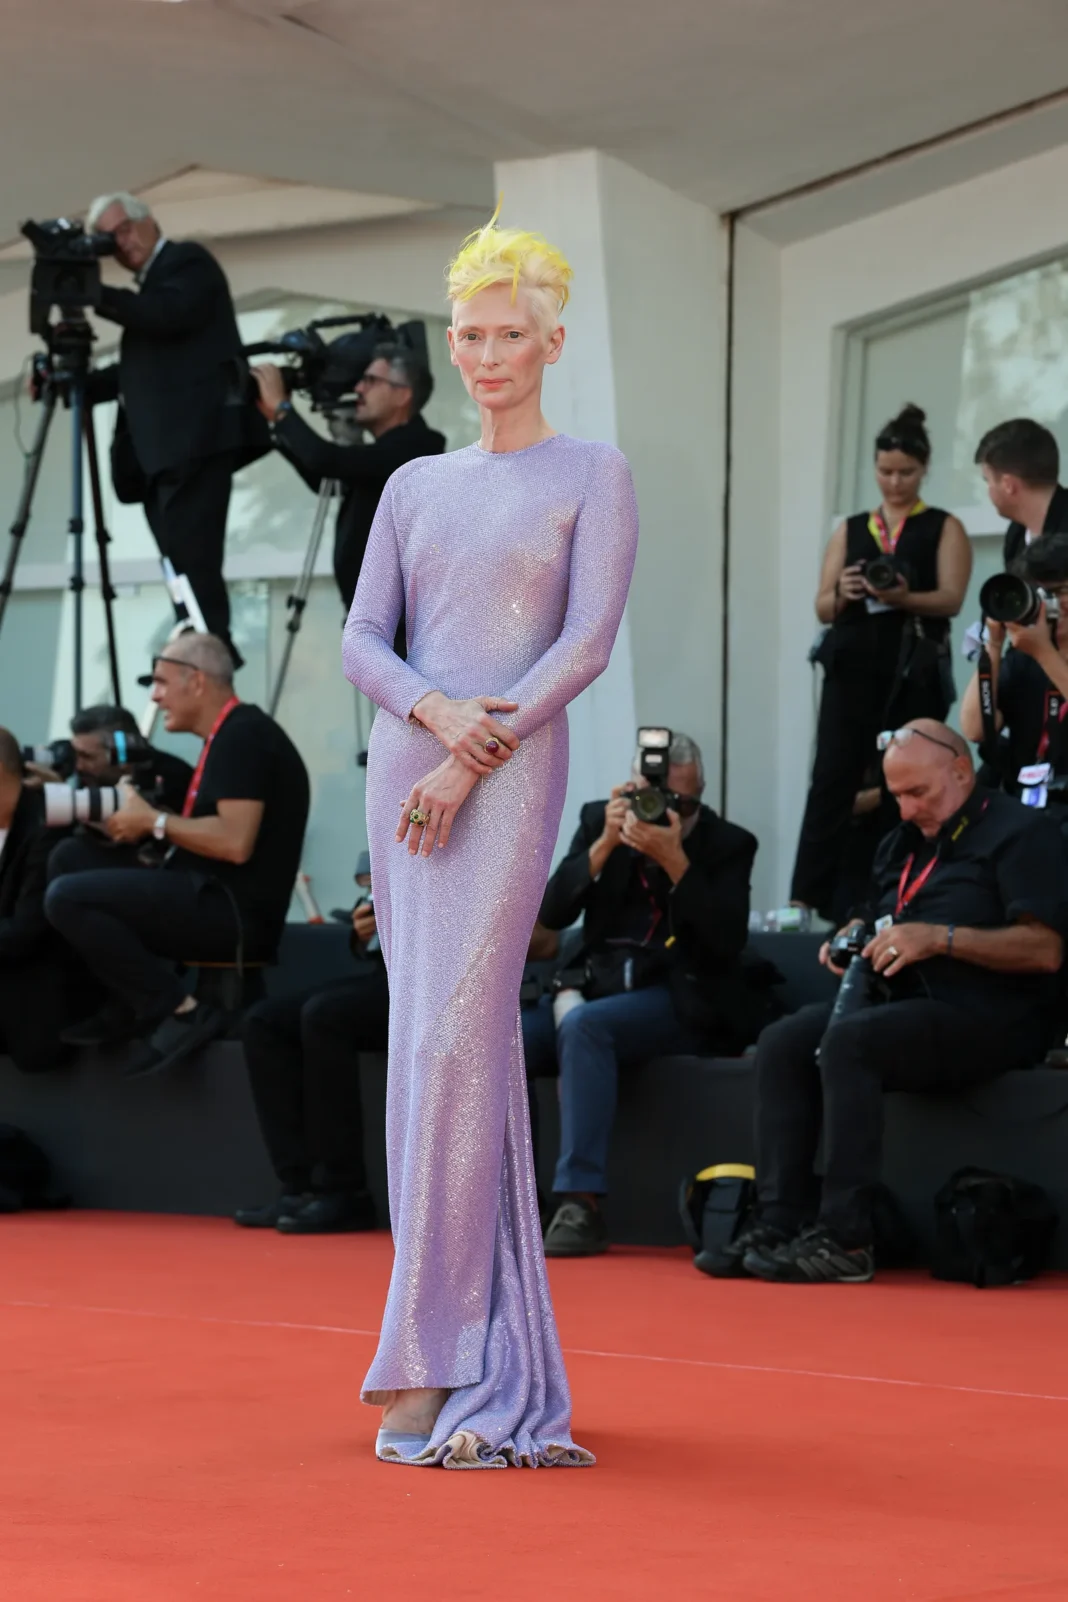 The 10 Best Dressed Stars at This Year’s Venice Film Festival